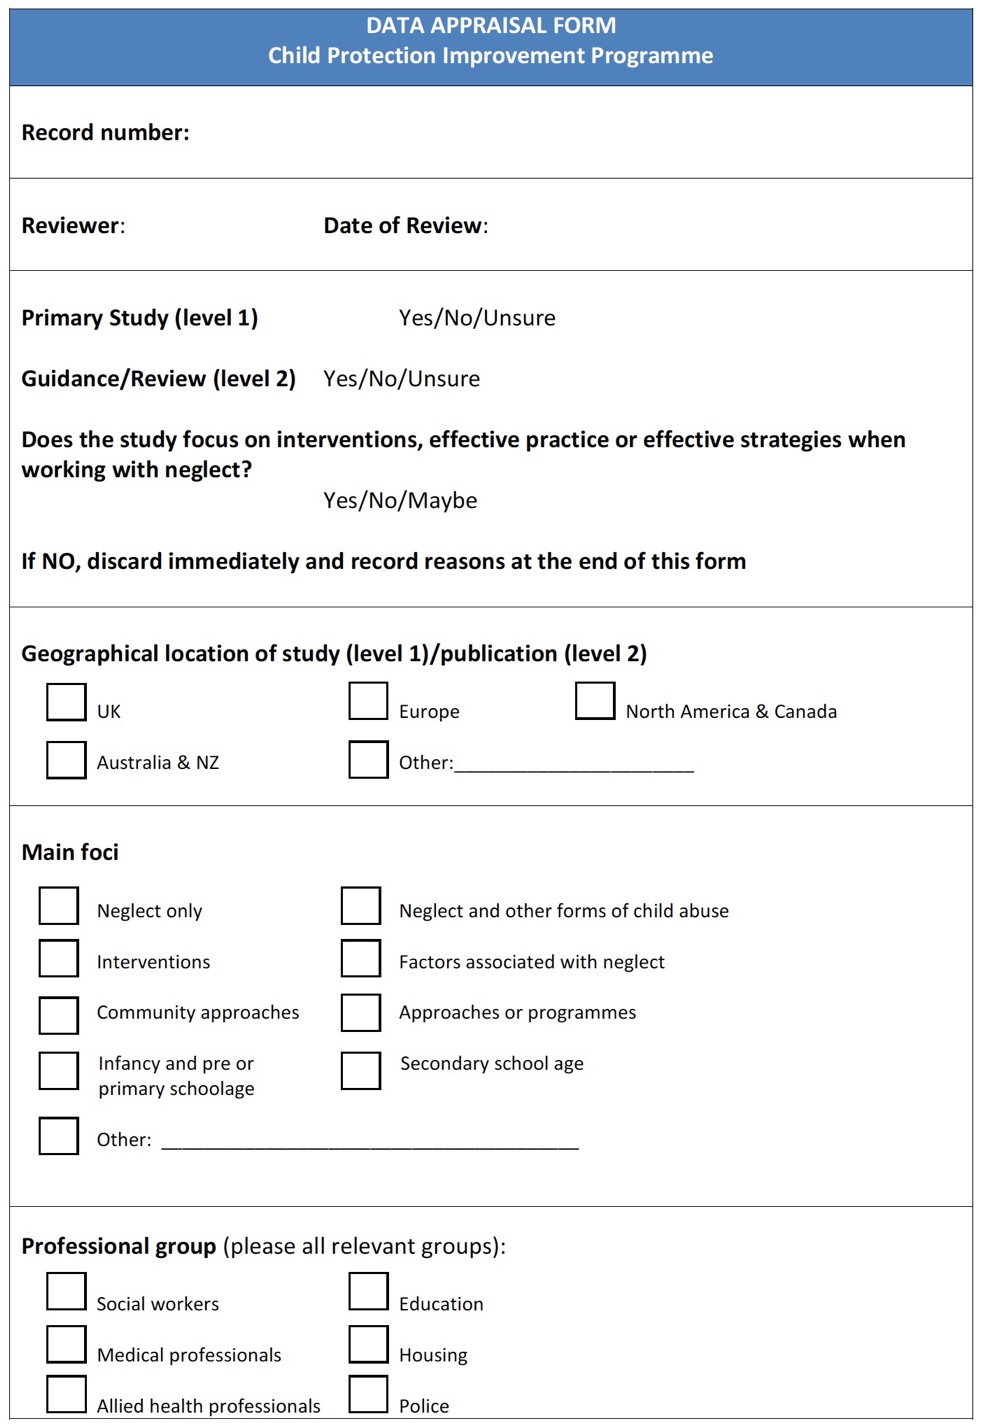 Example of data appraisal form - part 1